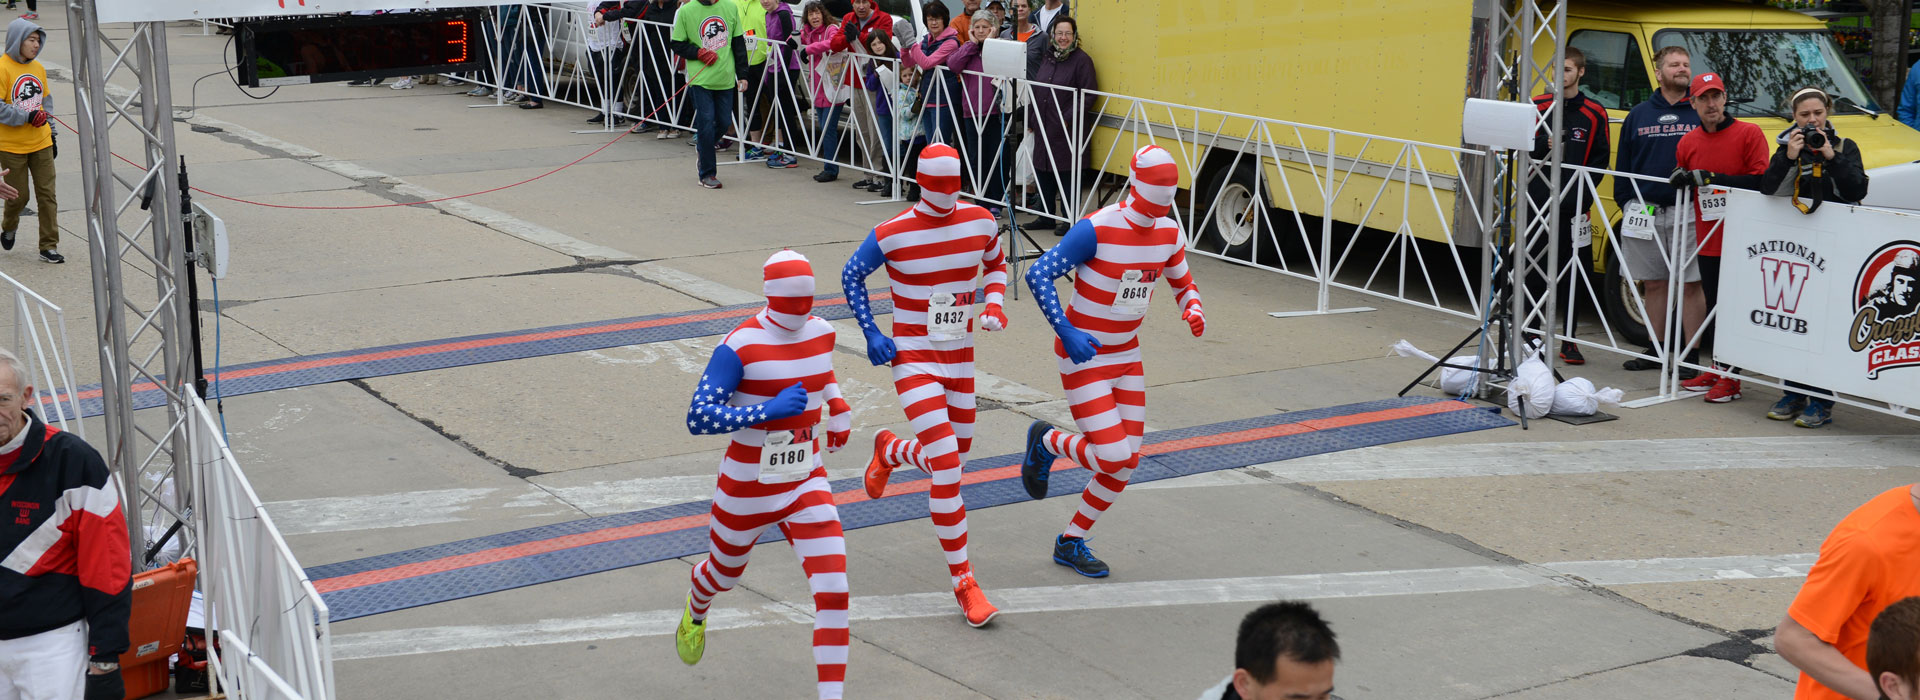 Start of the Race With 3 Runners Dressed in American Flag Spandex Costumes